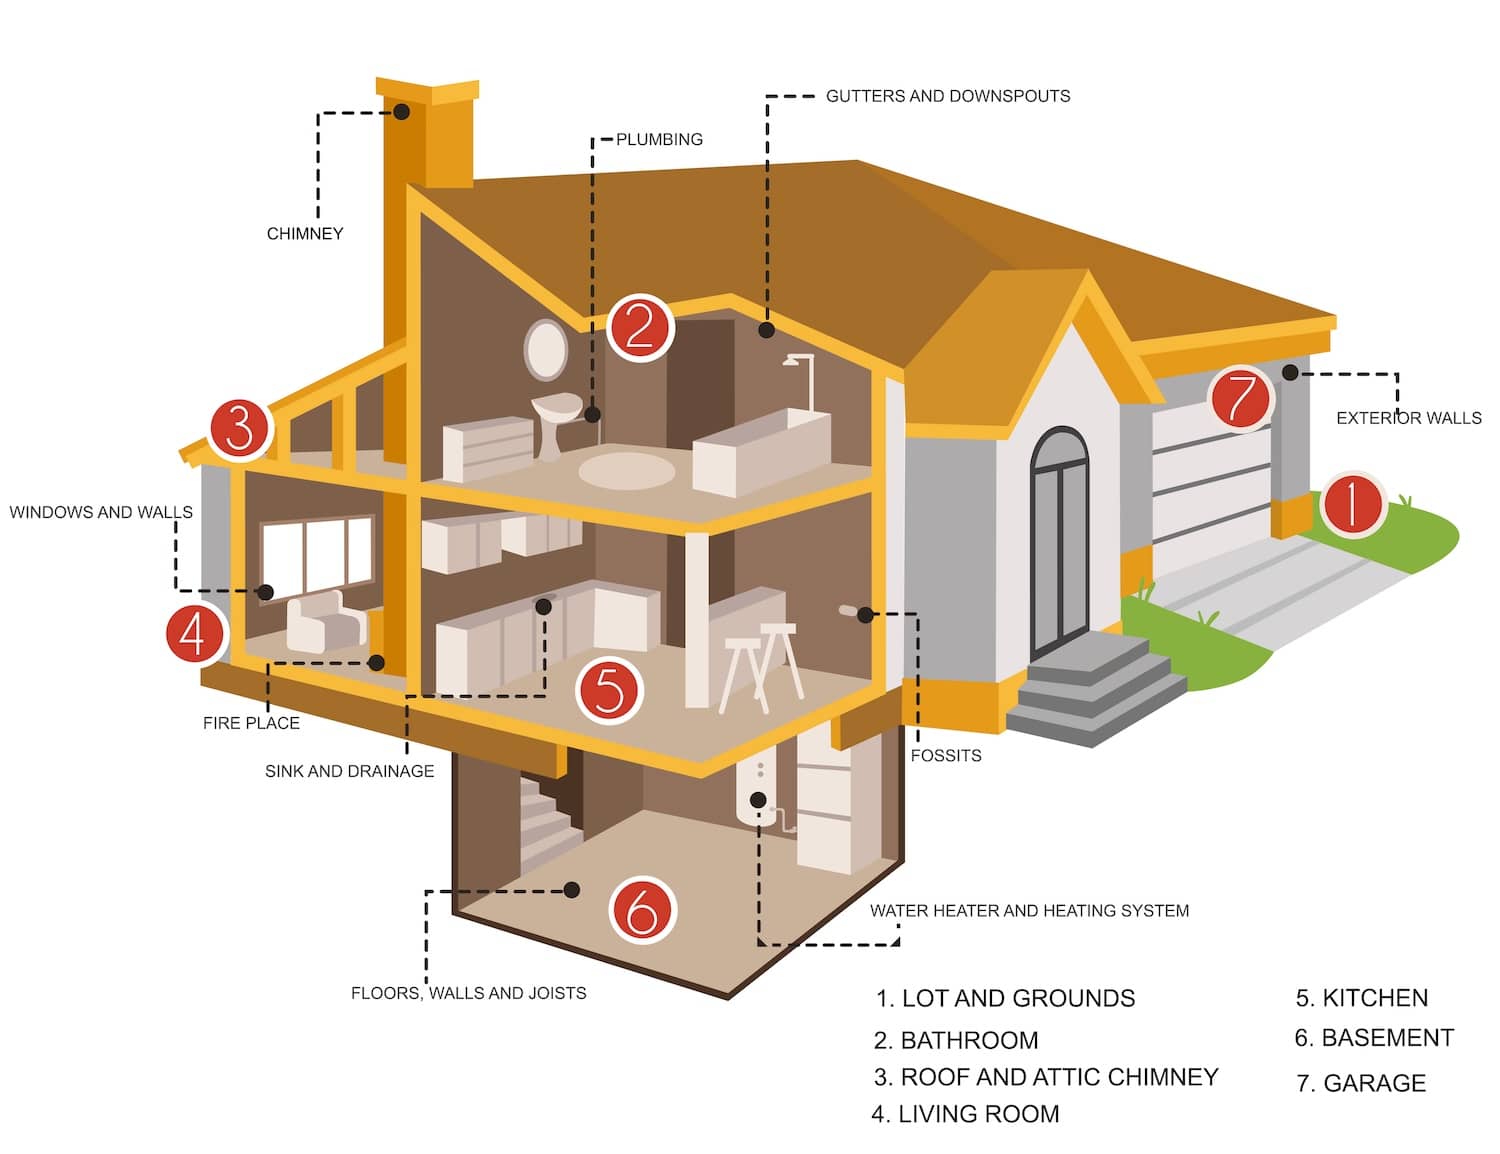 The general areas covered during the inspection of a house